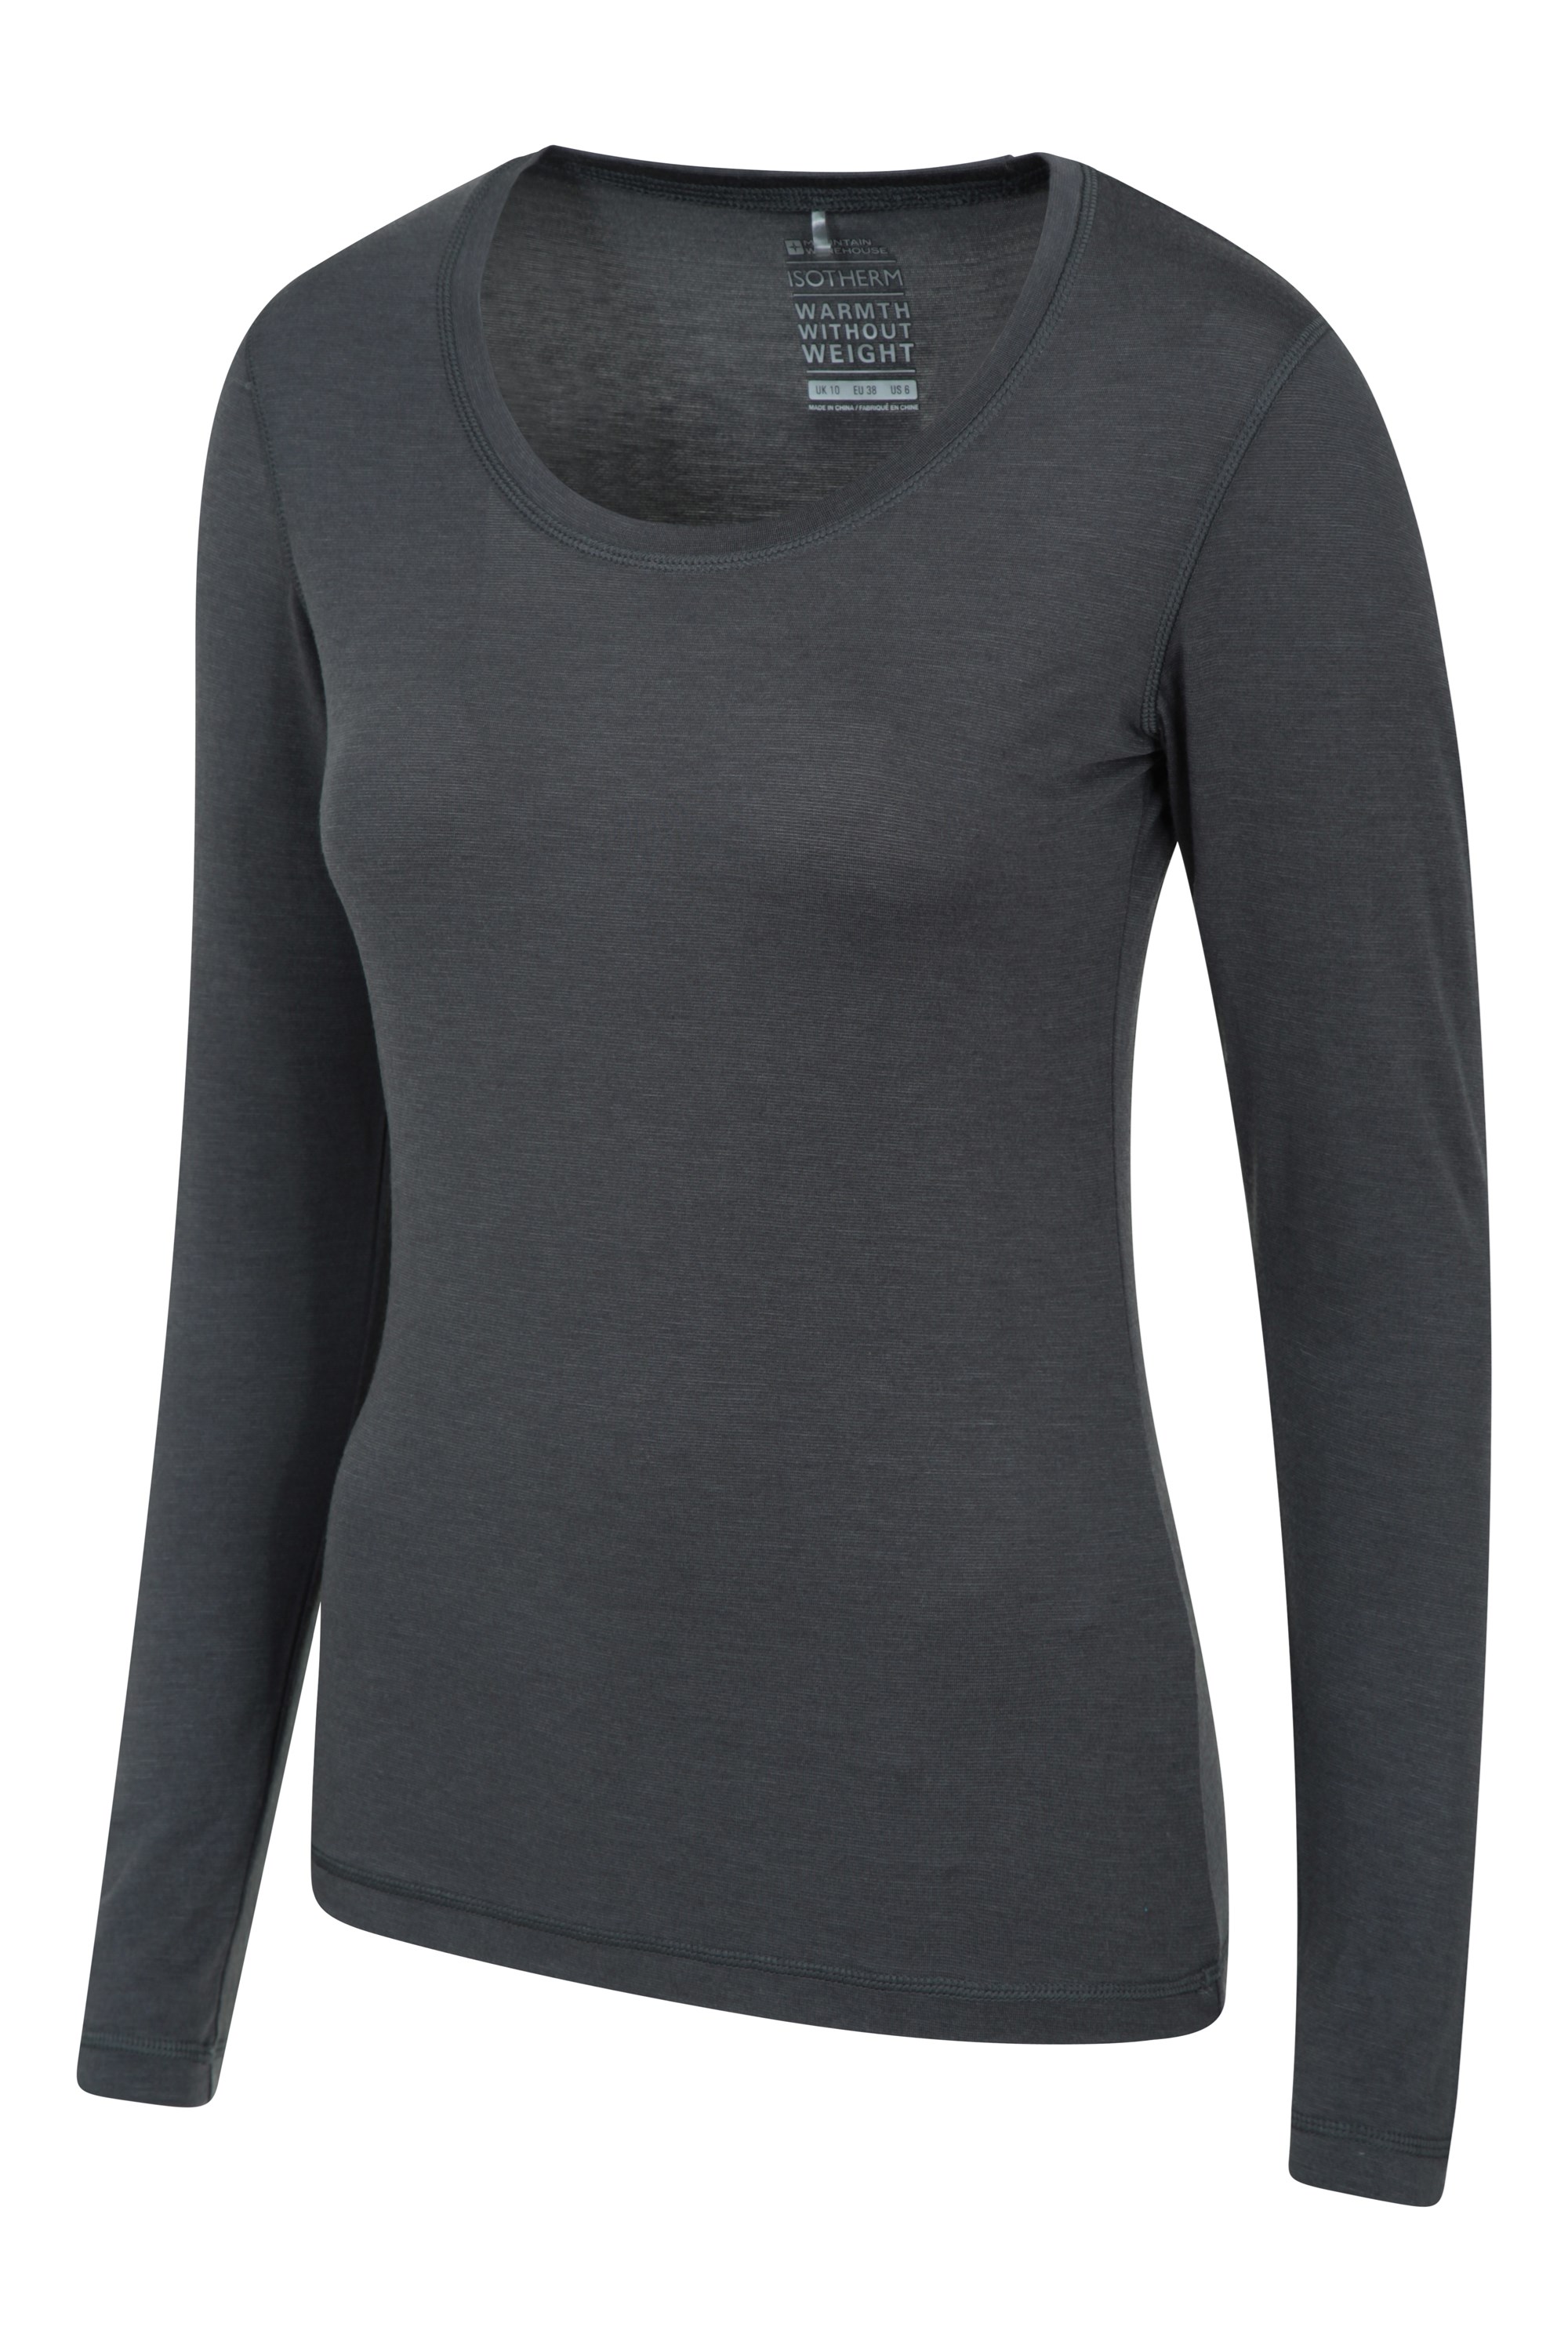 Keep The Heat Womens Thermal Top